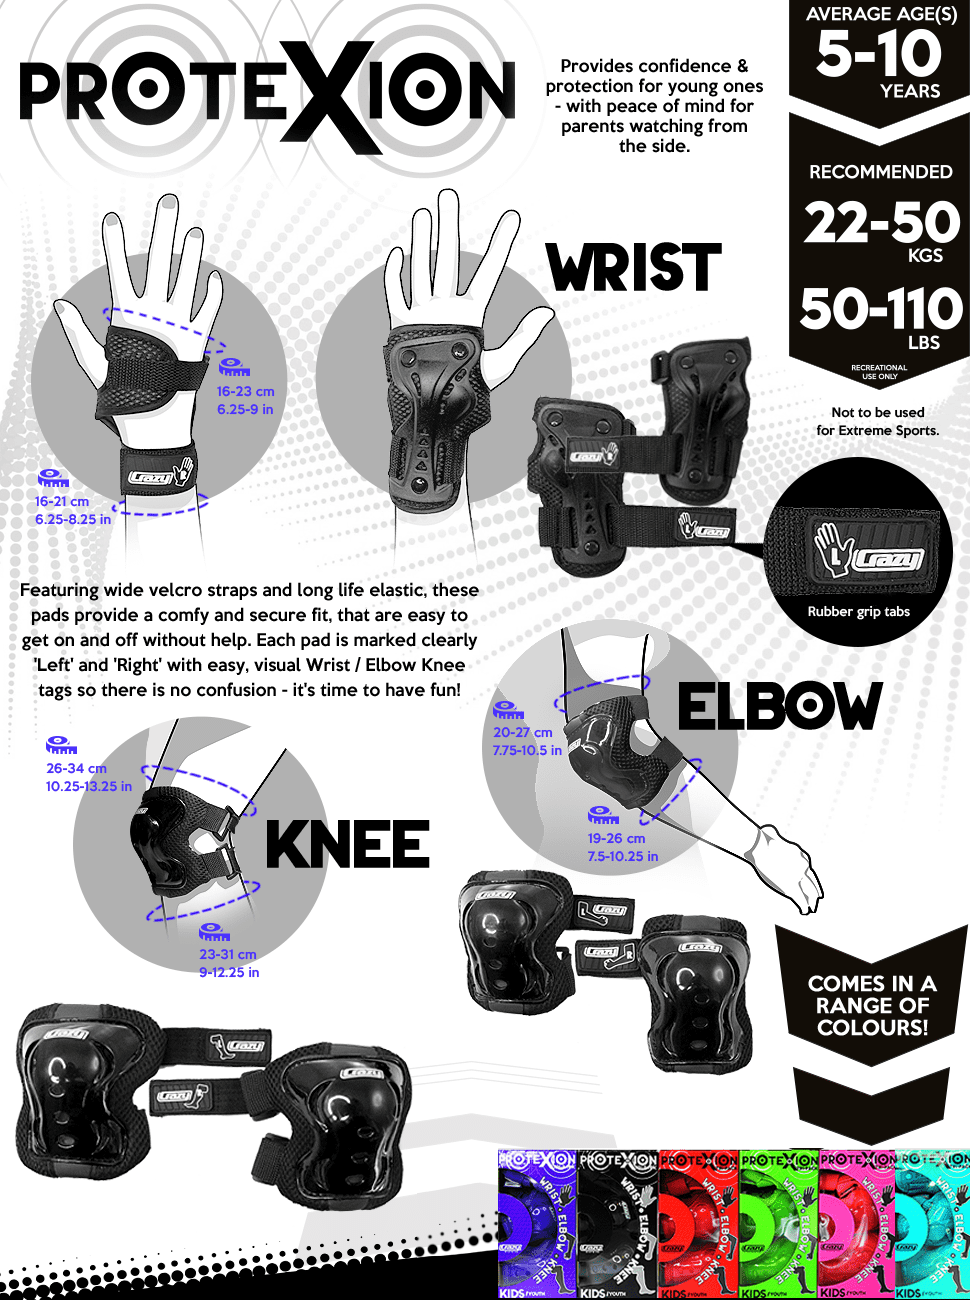 Includes Knee Crazy Skates Protexion Protective Gear Set for Kids Elbow and Wrist Pads